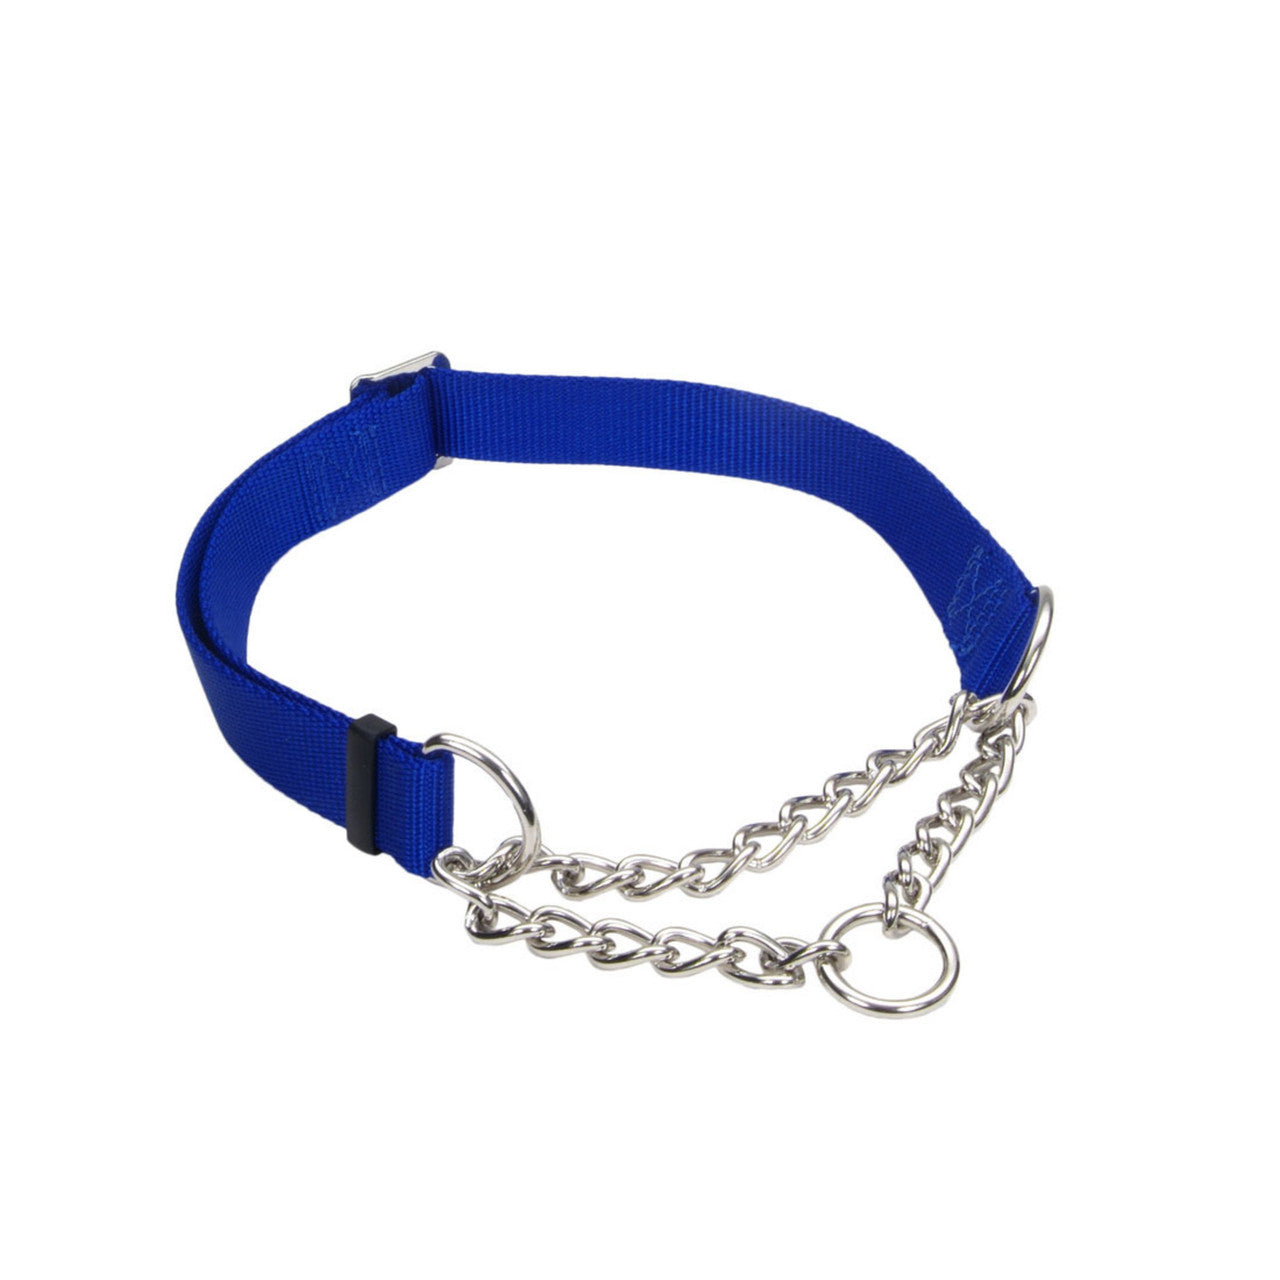 Check-Choke Adjustable Check Training Dog Collar Blue 3/4 in x 14-20 in